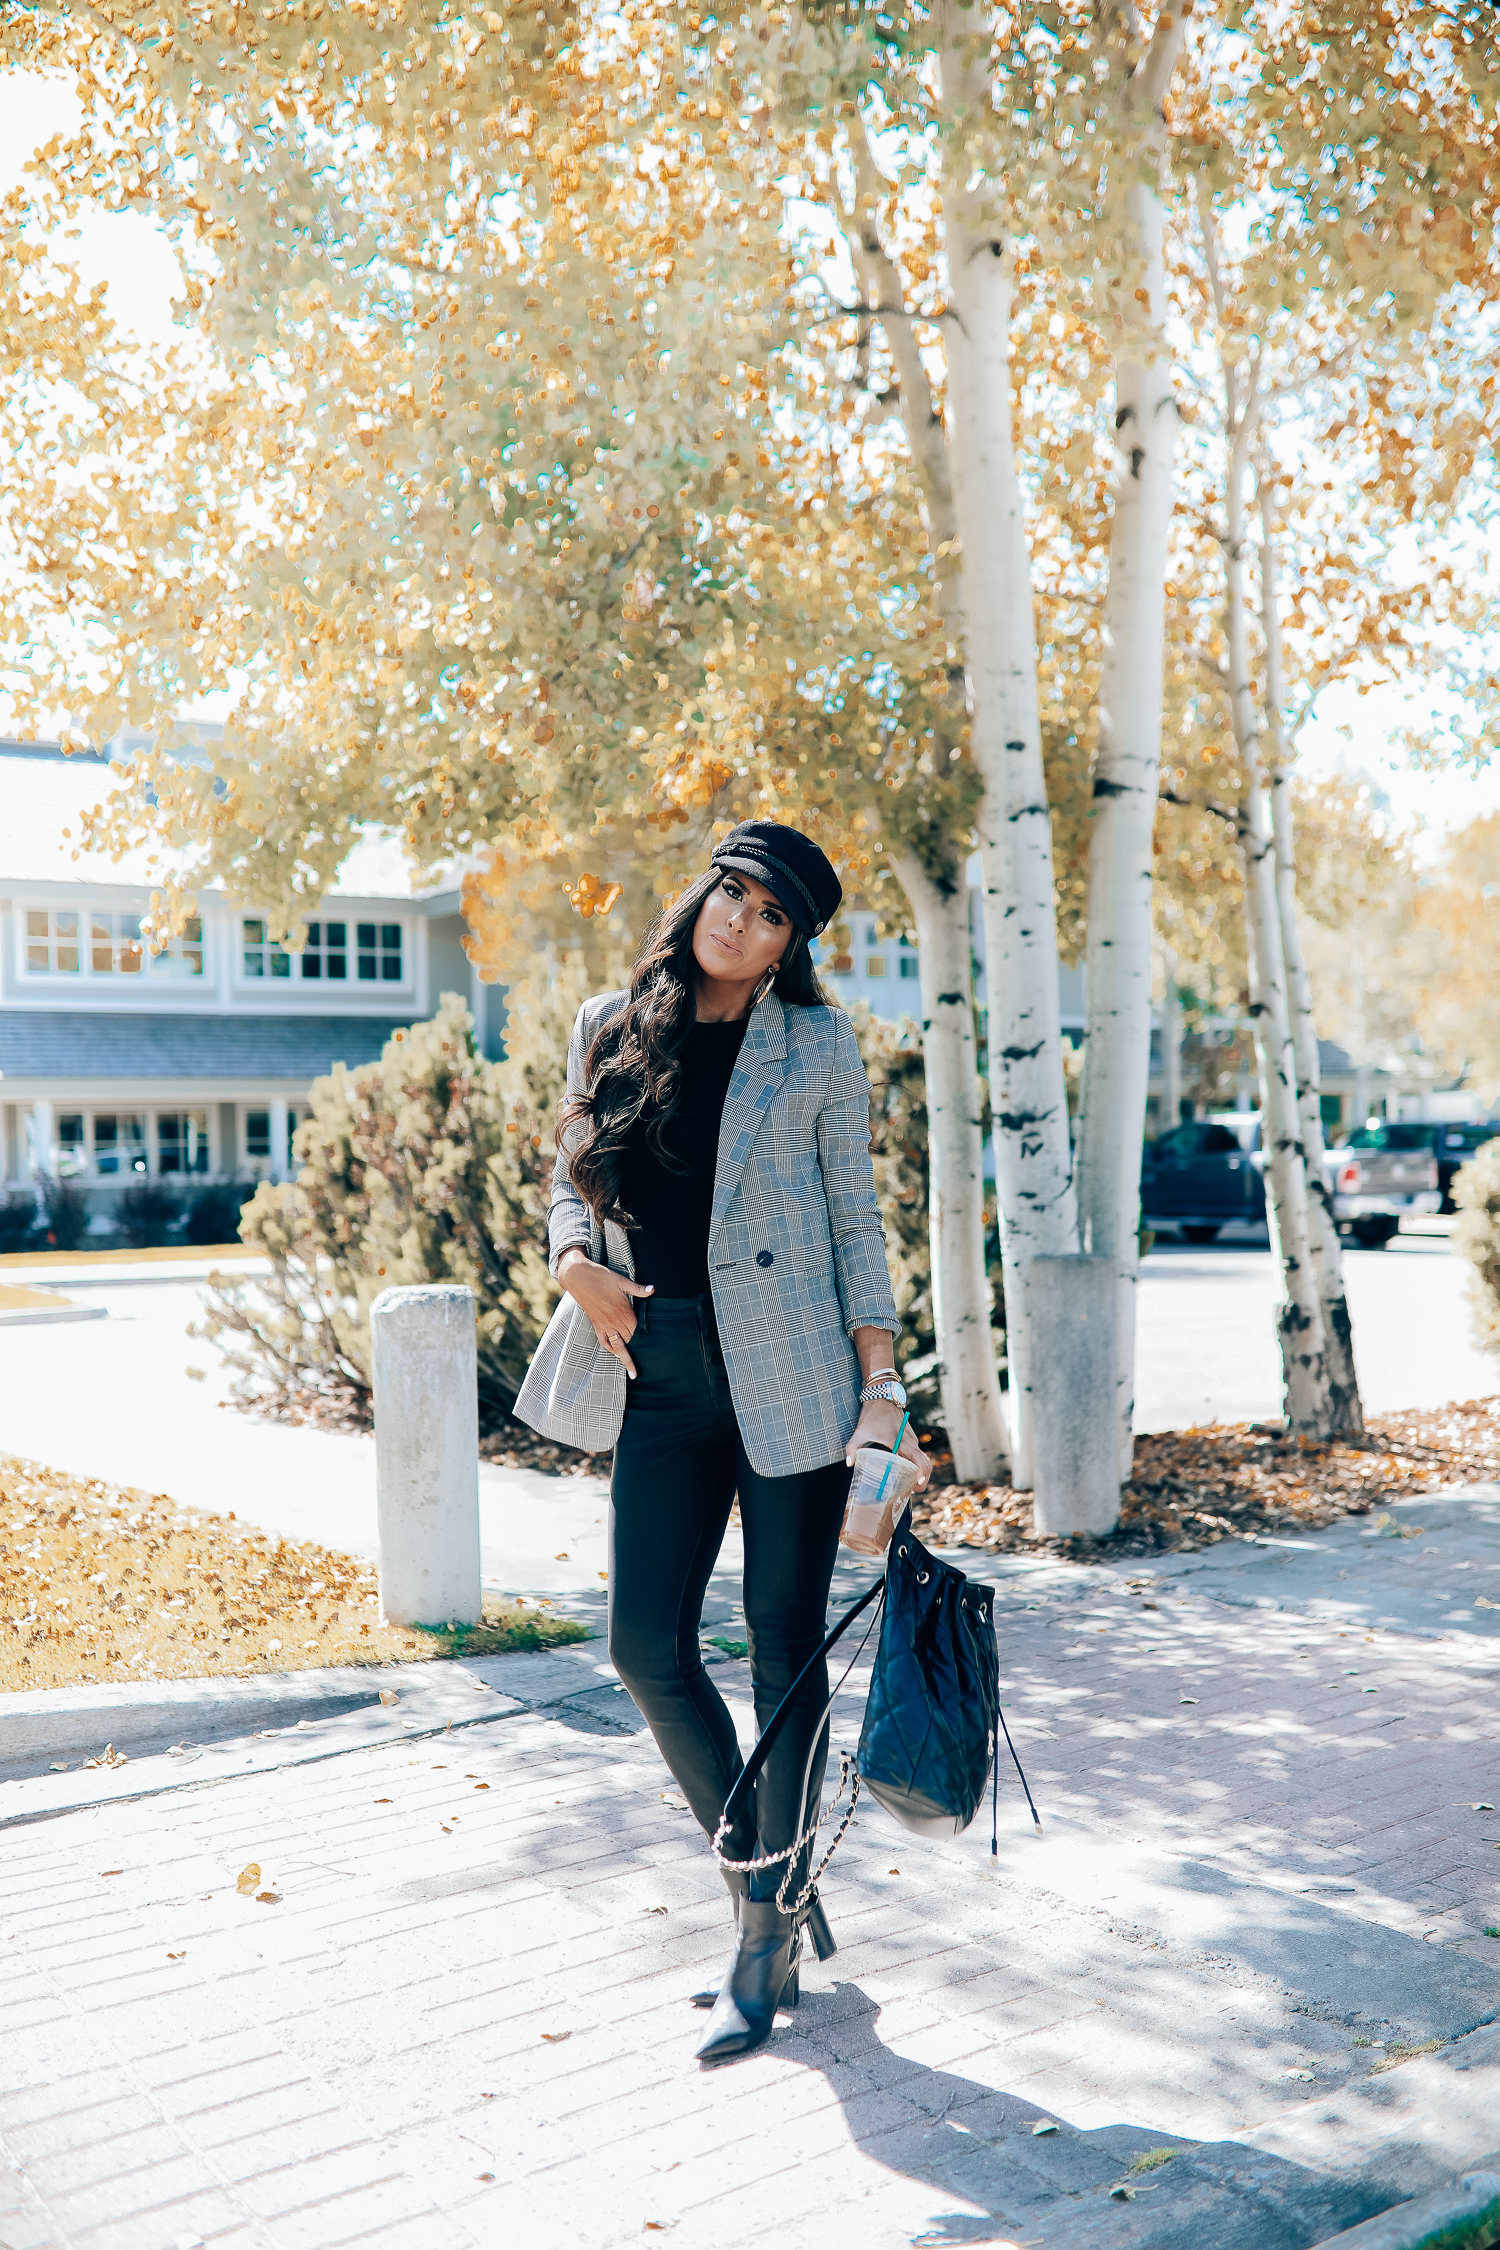 Oversized plaid blazer styled for Fall by top US fashion blog, The Sweetest Thing: image of a woman wearing an Aqua oversized plaid blazer, Splendid long sleeve top, BlankNYC vegan leggings, Marc Fisher booties, Chanel backpack, Baker boy cap, a Rolex watch, Argento Vivo earrings, and Cartier bracelets